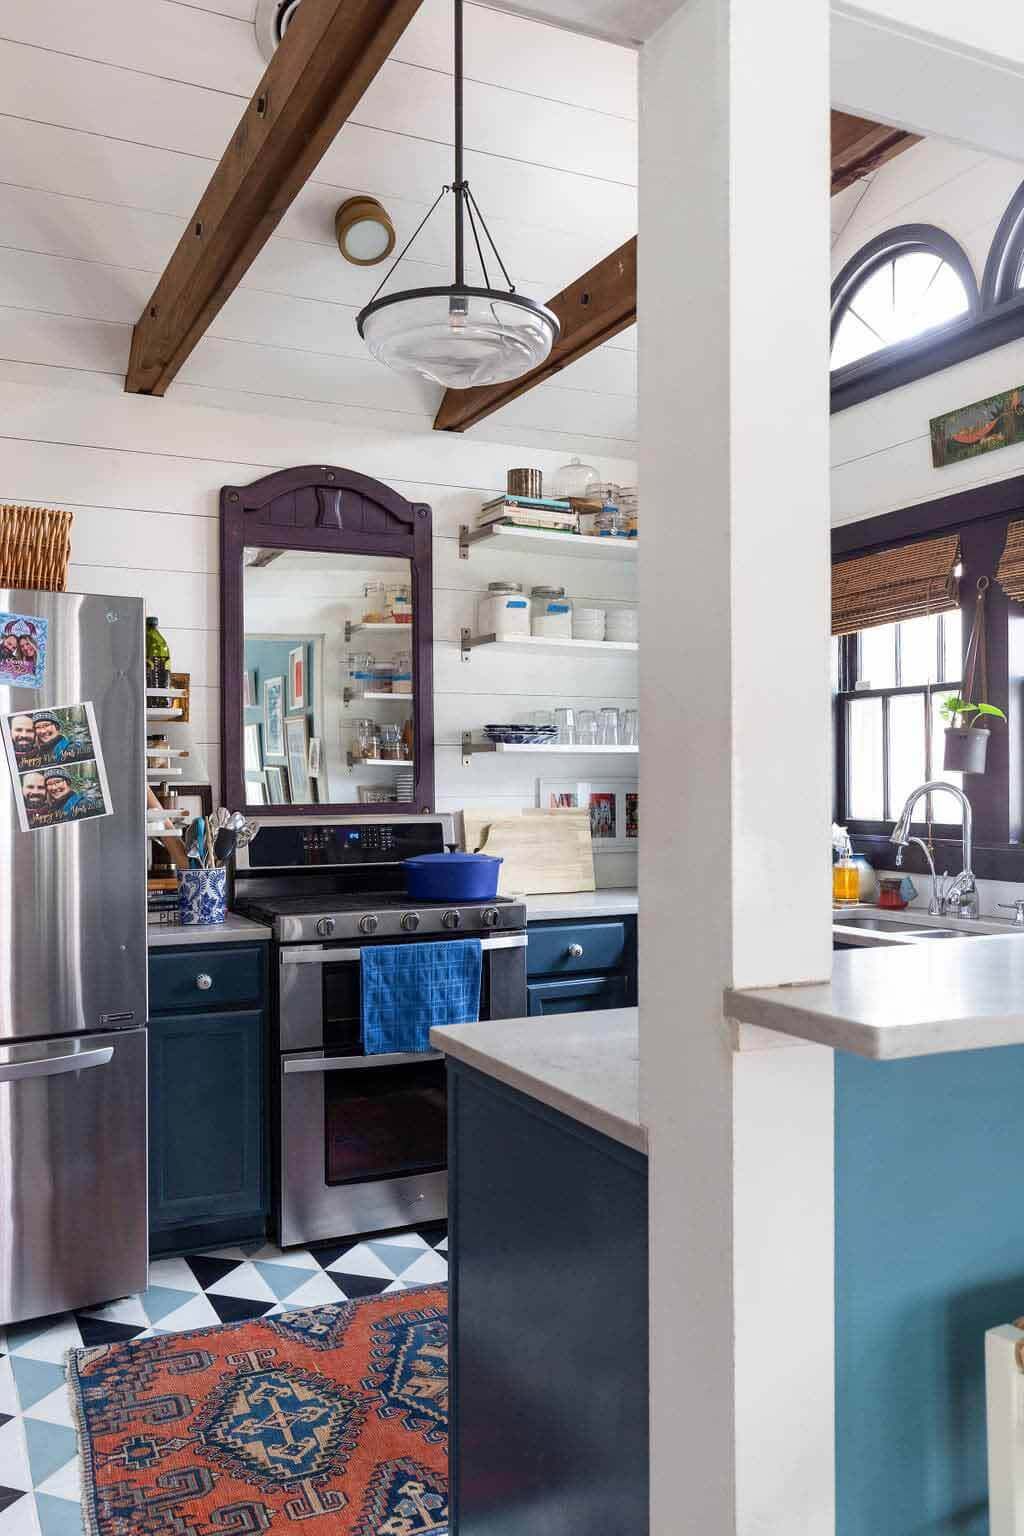 Kitchen in Meredith Olinger's Memphis home